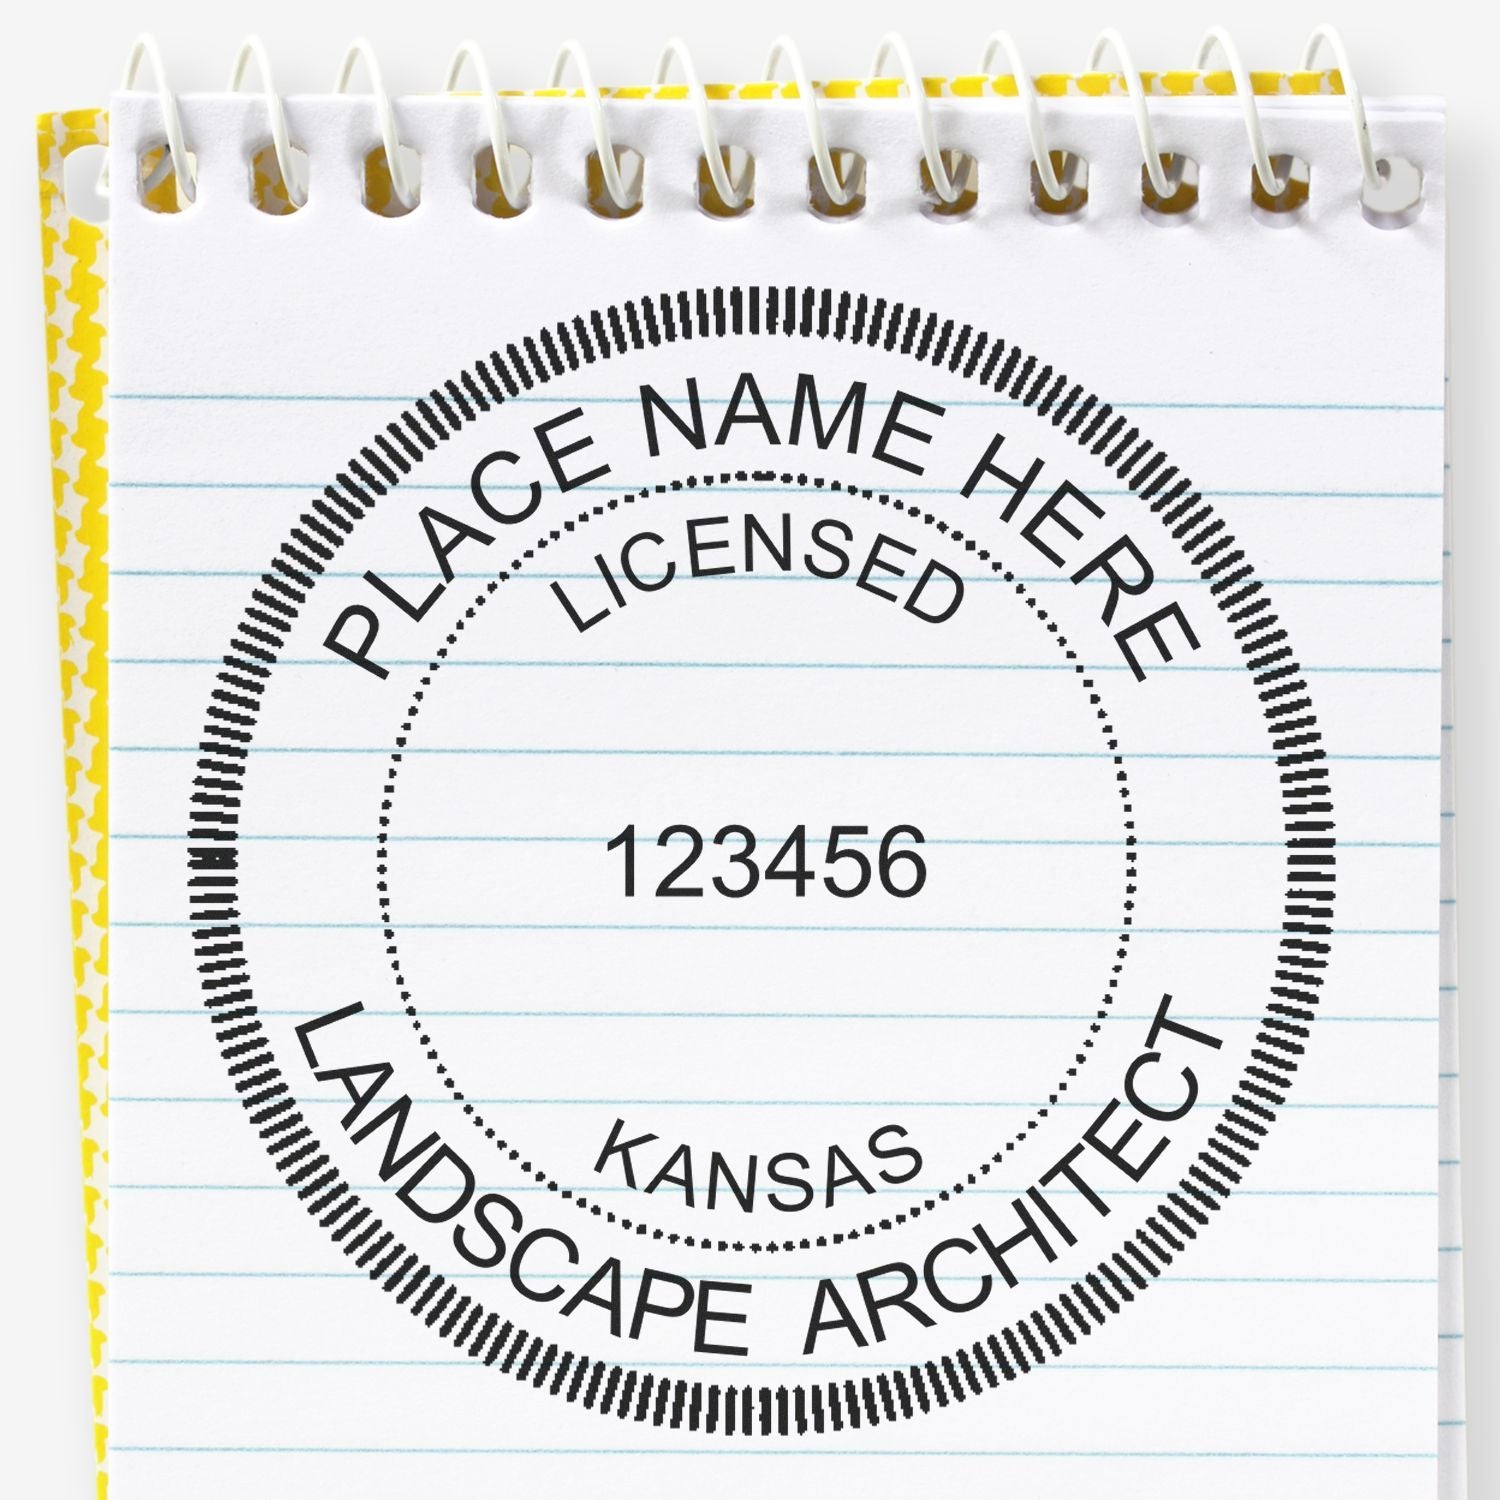 A lifestyle photo showing a stamped image of the Digital Kansas Landscape Architect Stamp on a piece of paper